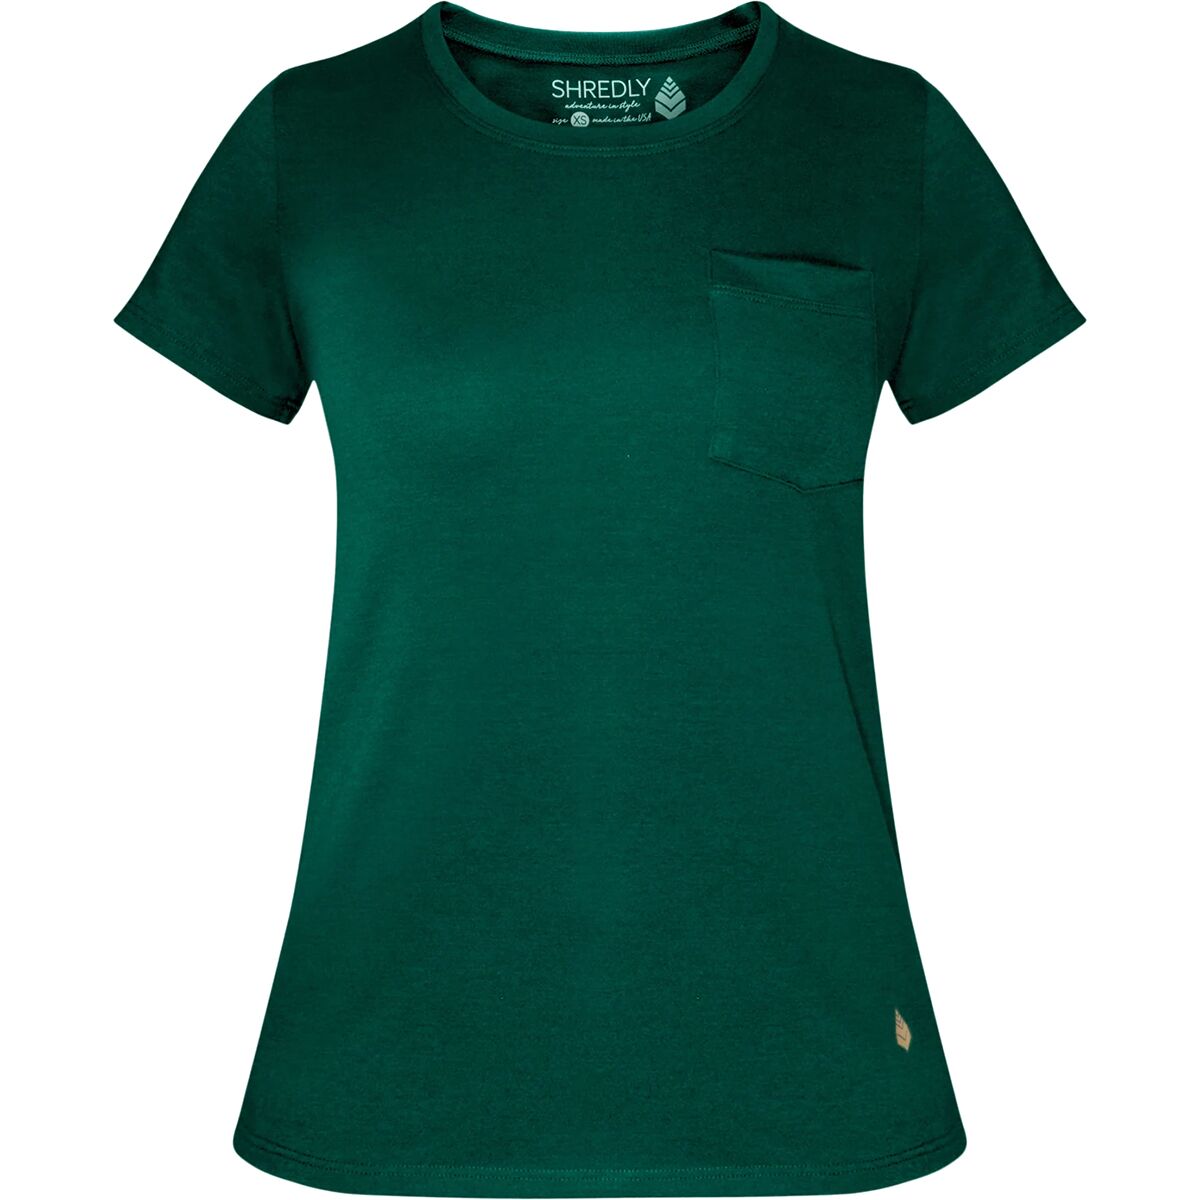 SHREDLY the POCKET TEE jersey - Women's